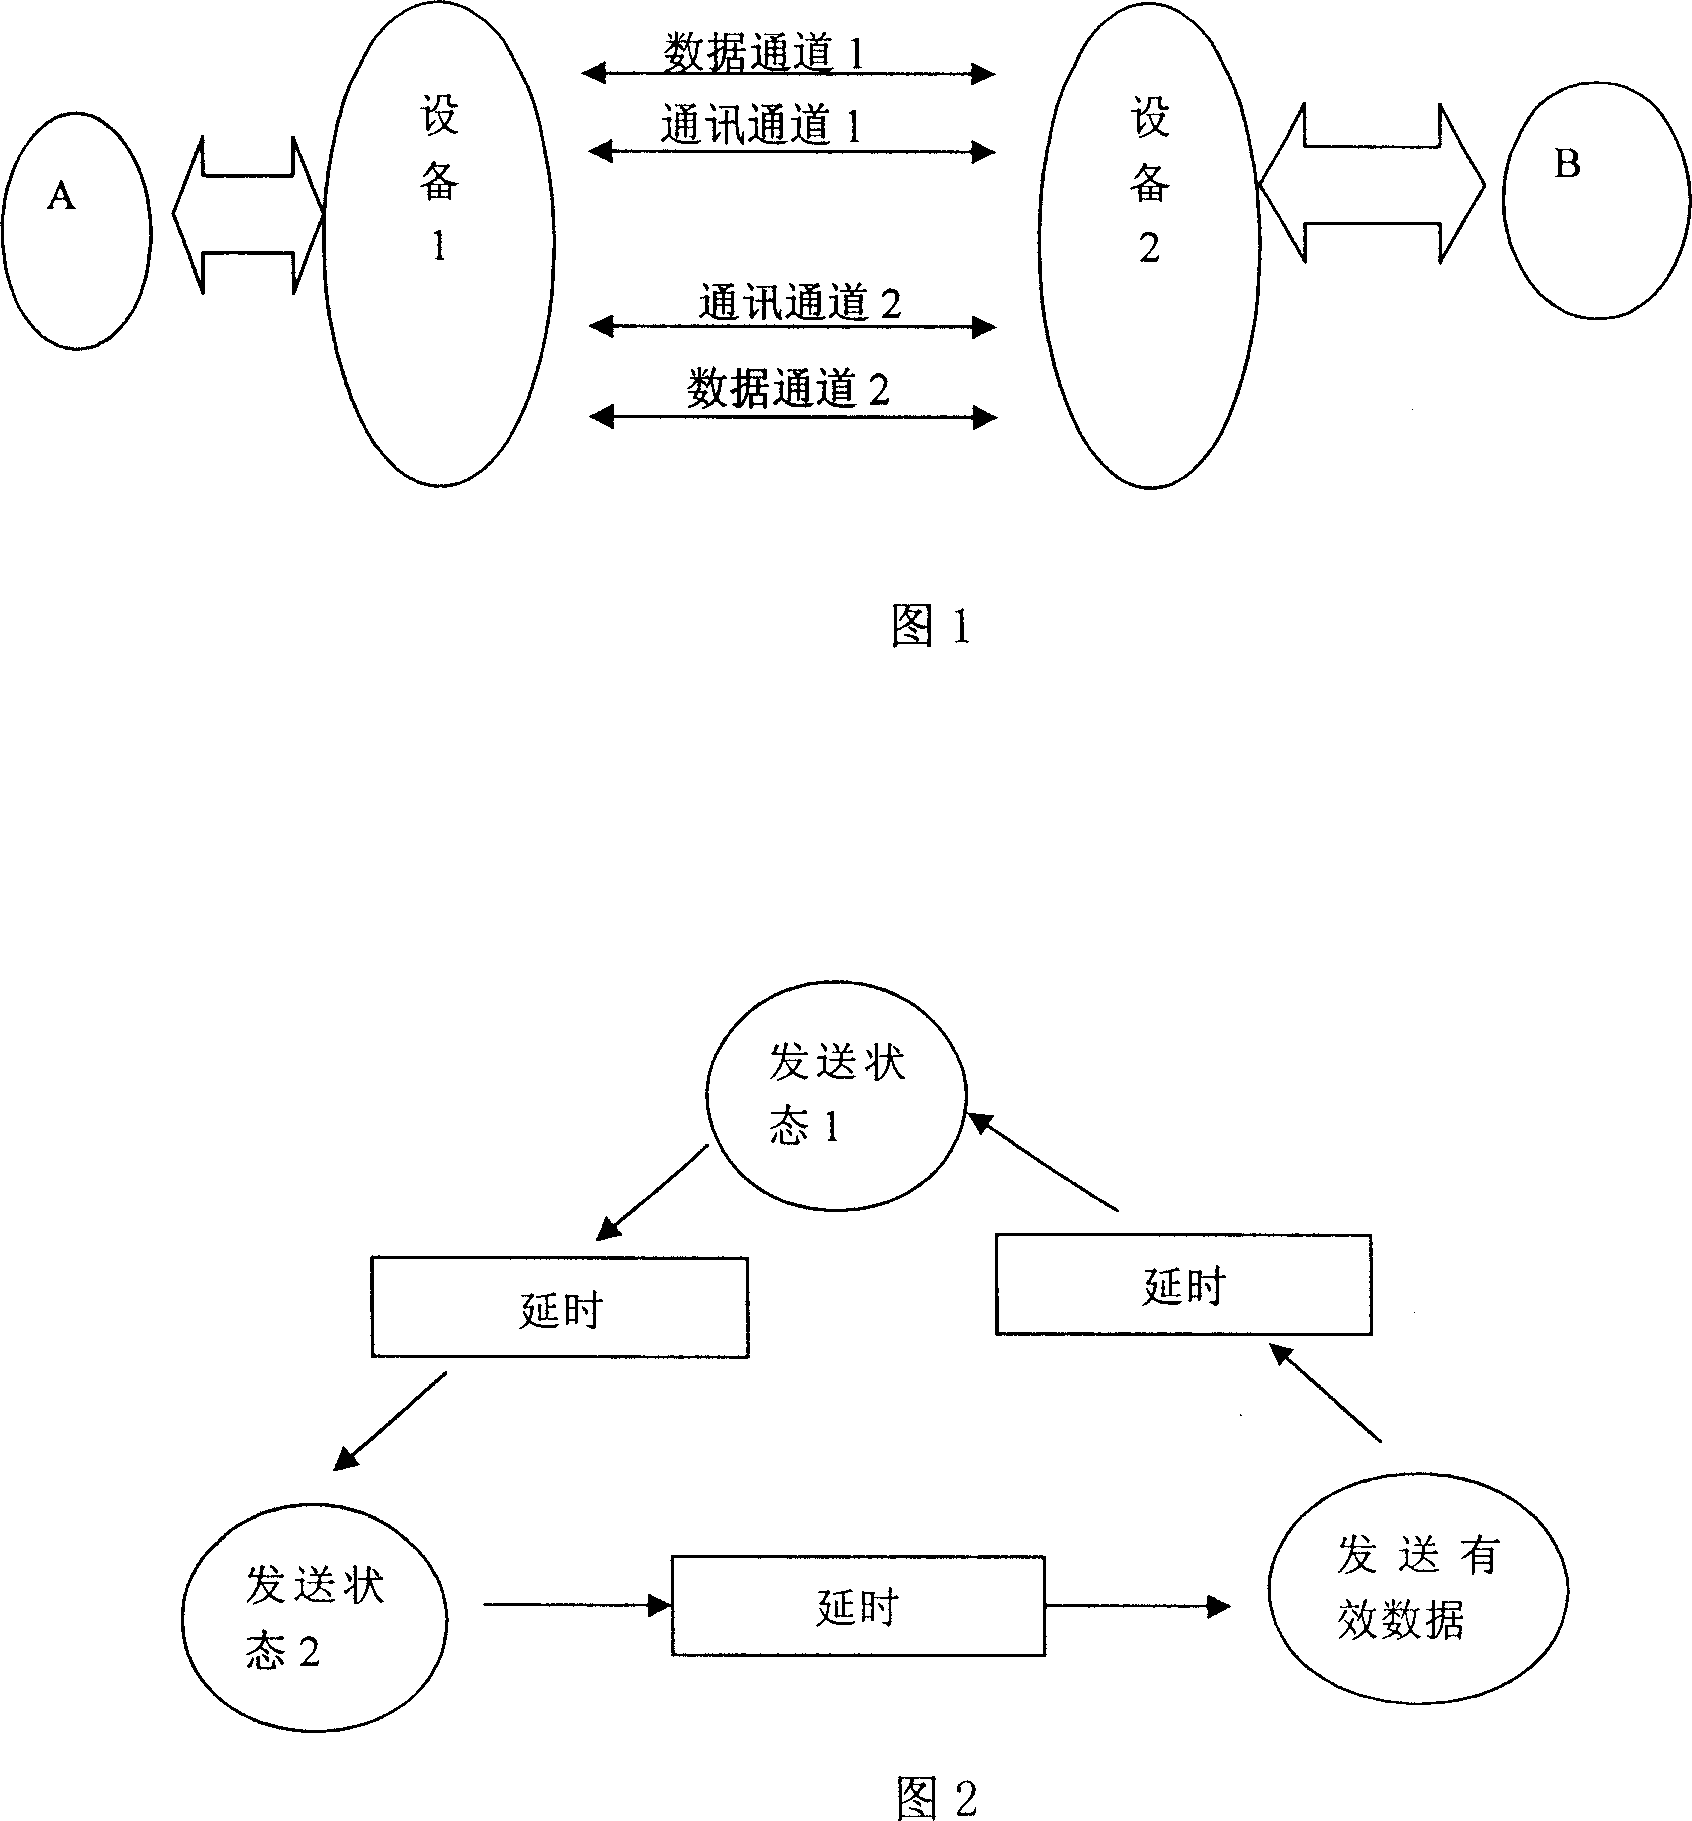 Master and slave converting method for communication link circuit